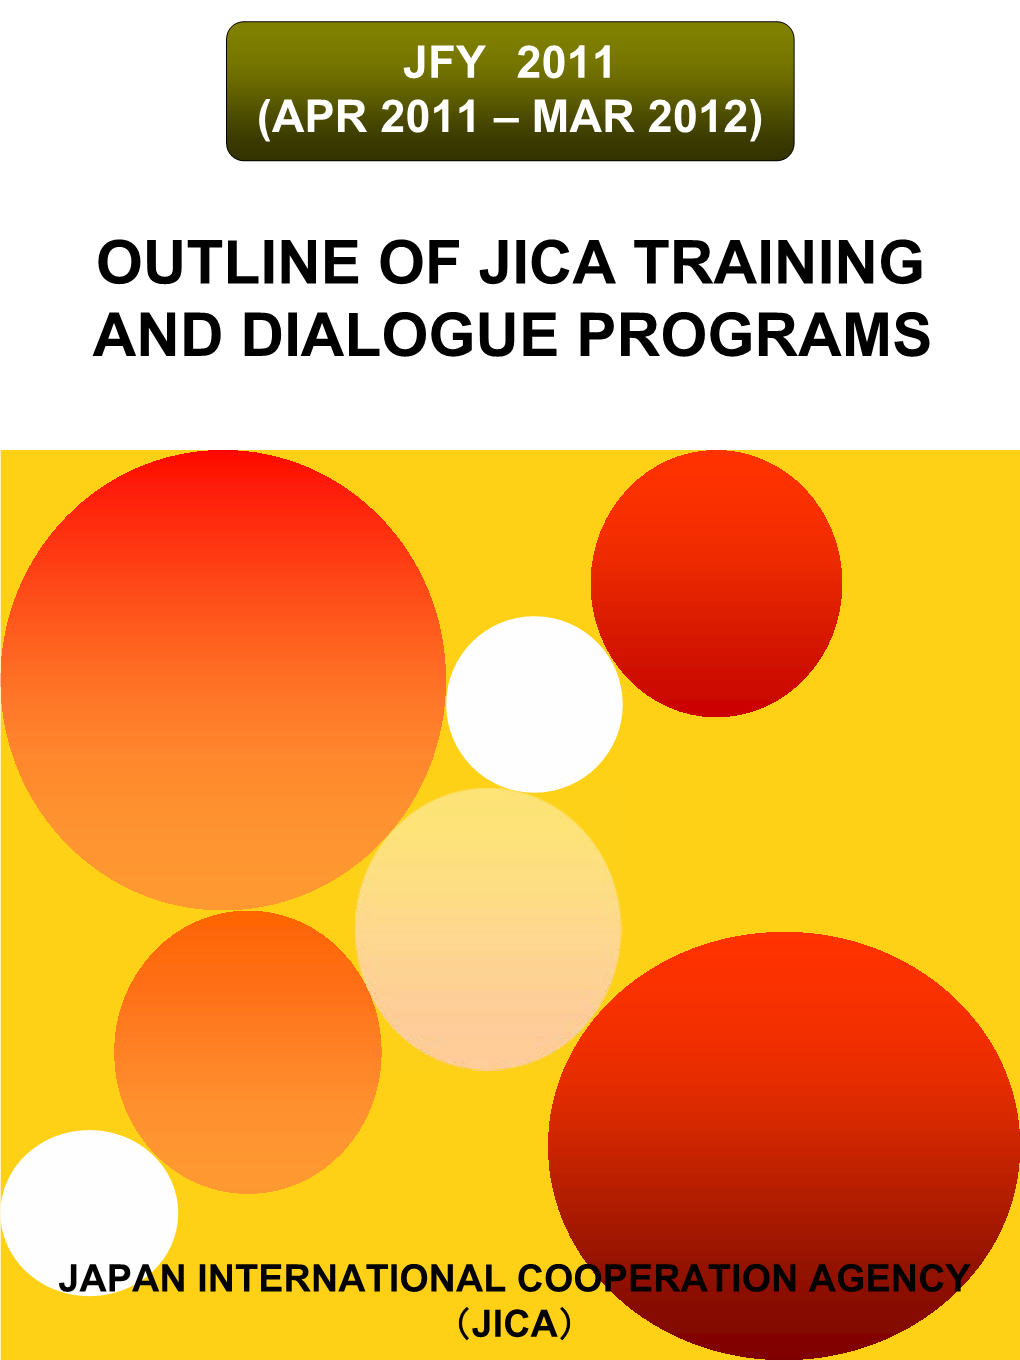 Outline of Jica Training and Dialogue Programs